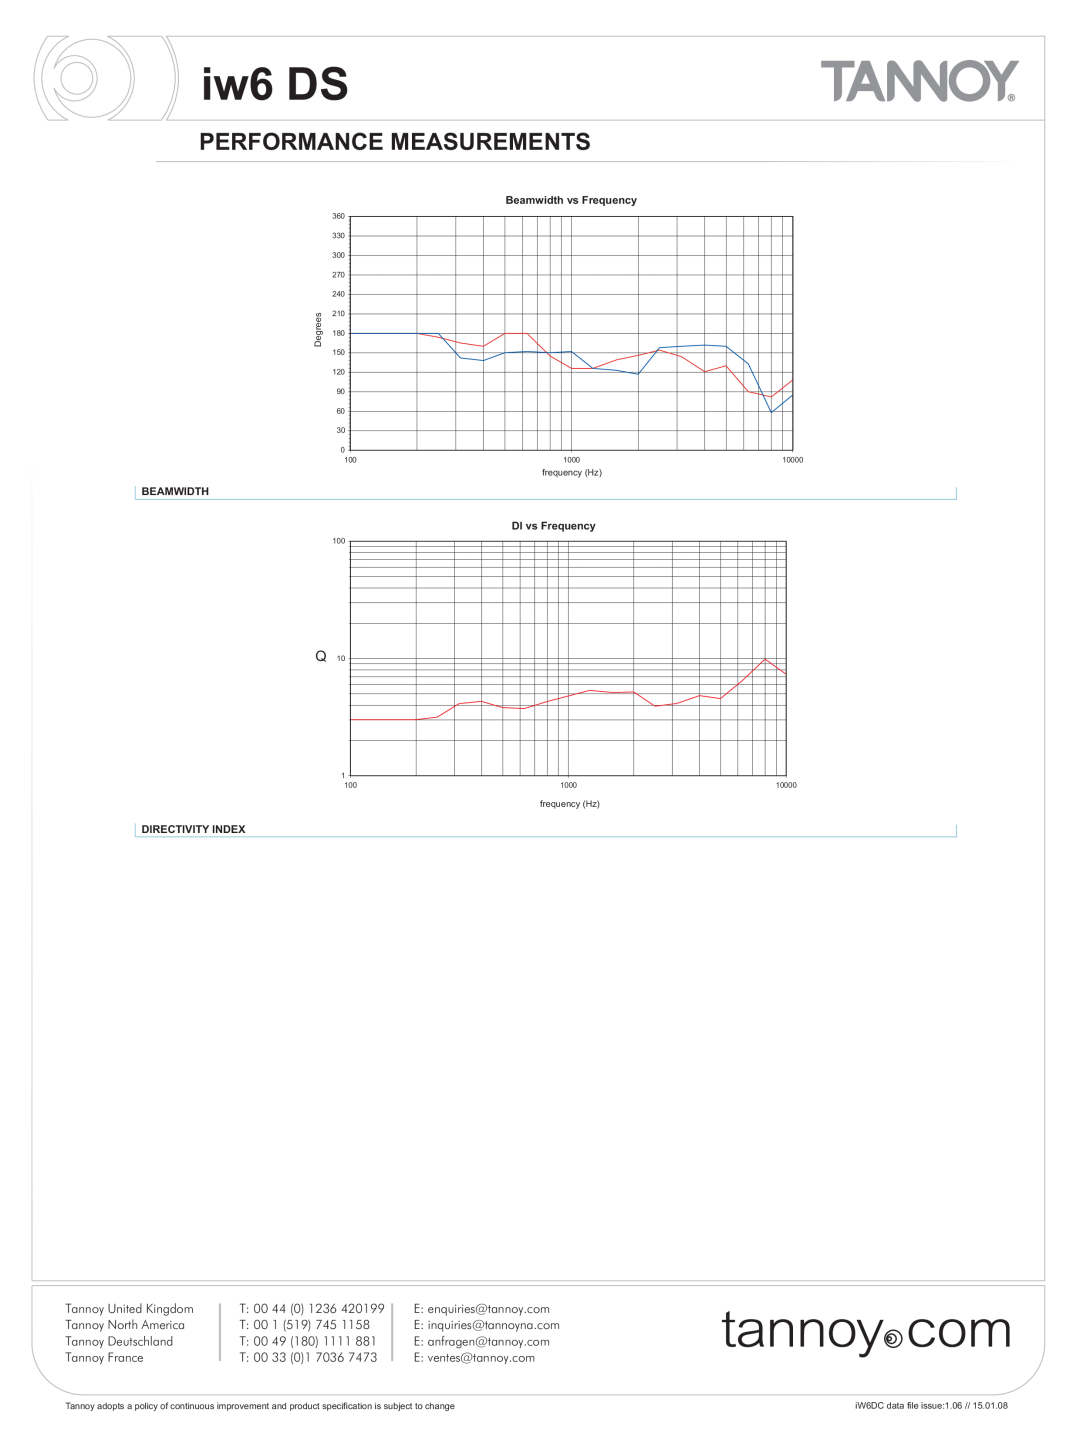 Tannoy iw6 DS warranty Performance Measurements, Beamwidth vs Frequency, DI vs Frequency, Directivity Index 